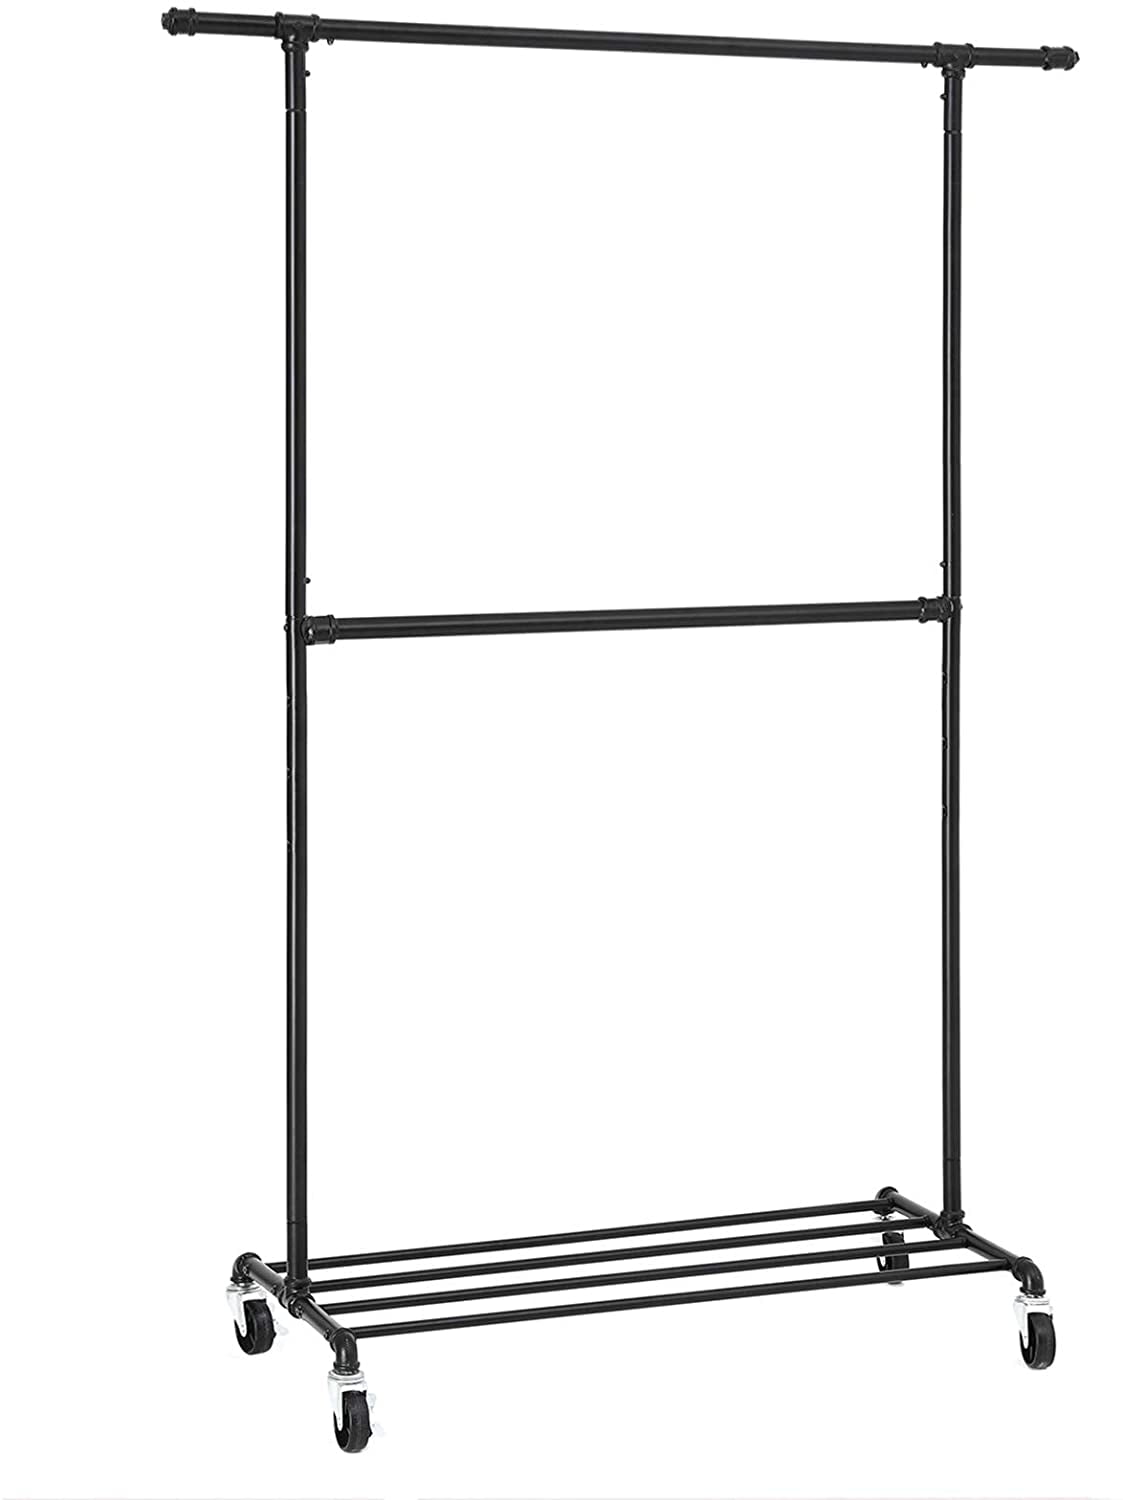 Industrial Style Pipe Clothing Rack for Store Shelf Black UHSR63BK Entryway Closet Living Room Garment Rack with Wheels SONGMICS Clothes Garment Rack Heavy Duty